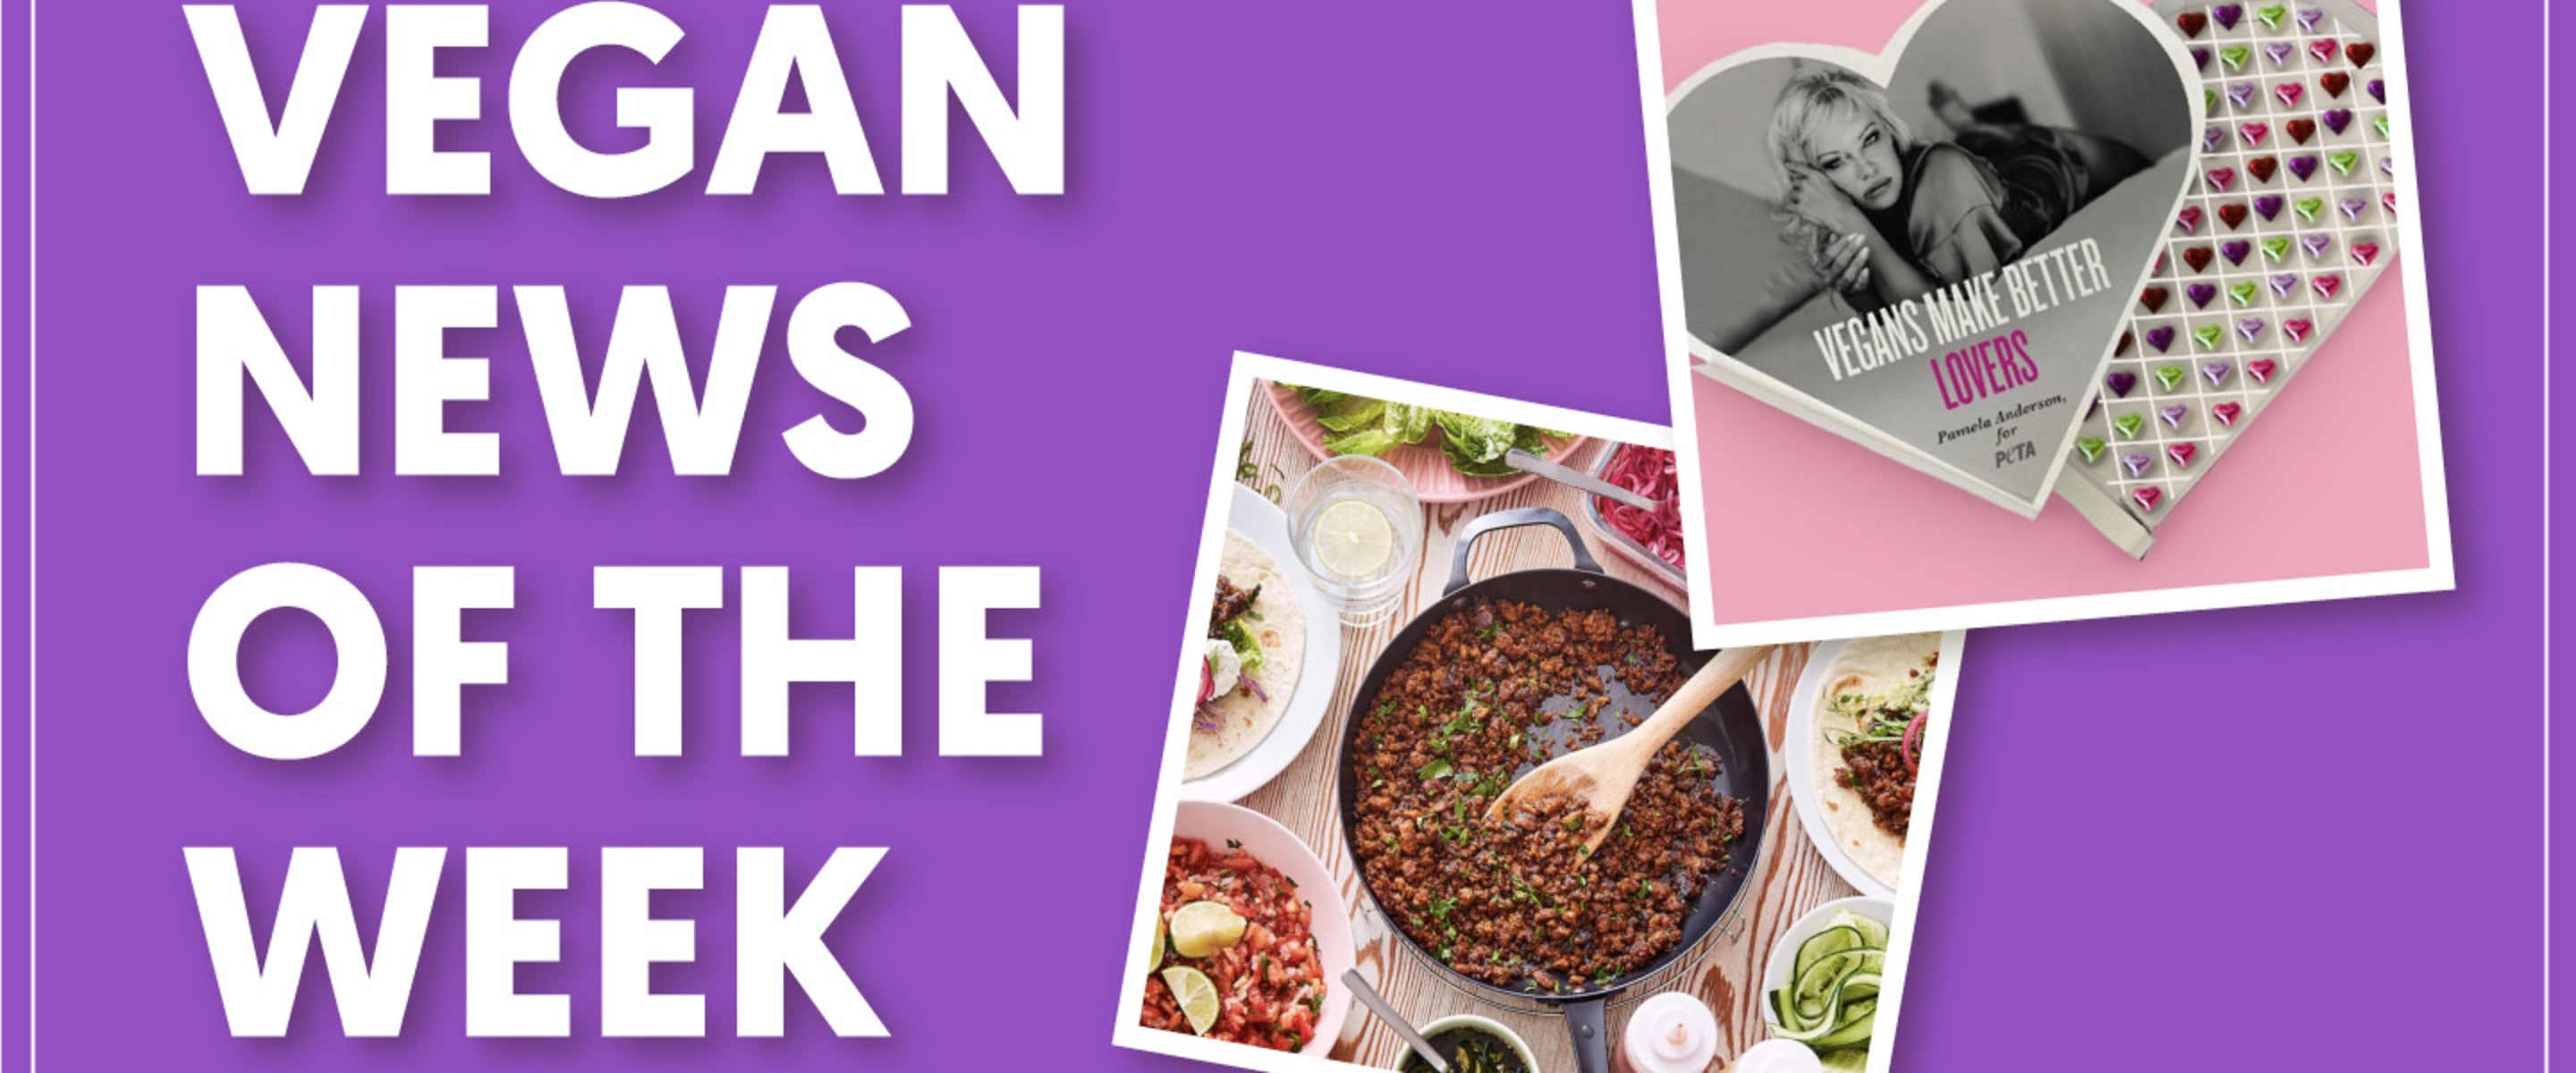 Pamela Anderson's Sexy Chocolates, IKEA's New Meatless Beef, and More Vegan Food News of the Week